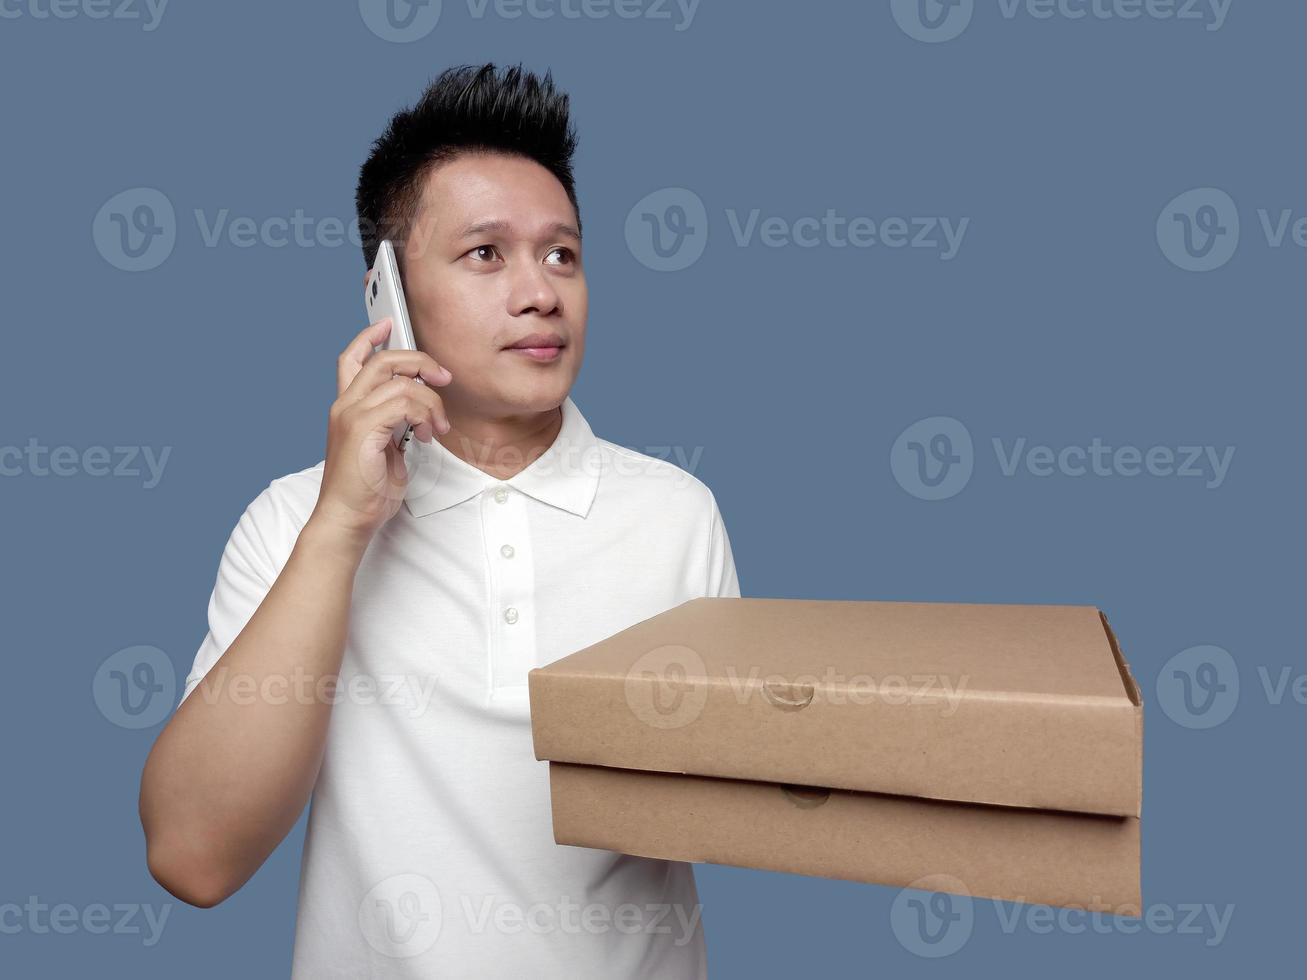 Man holding a cardboard box while making a phone call and looking up. photo